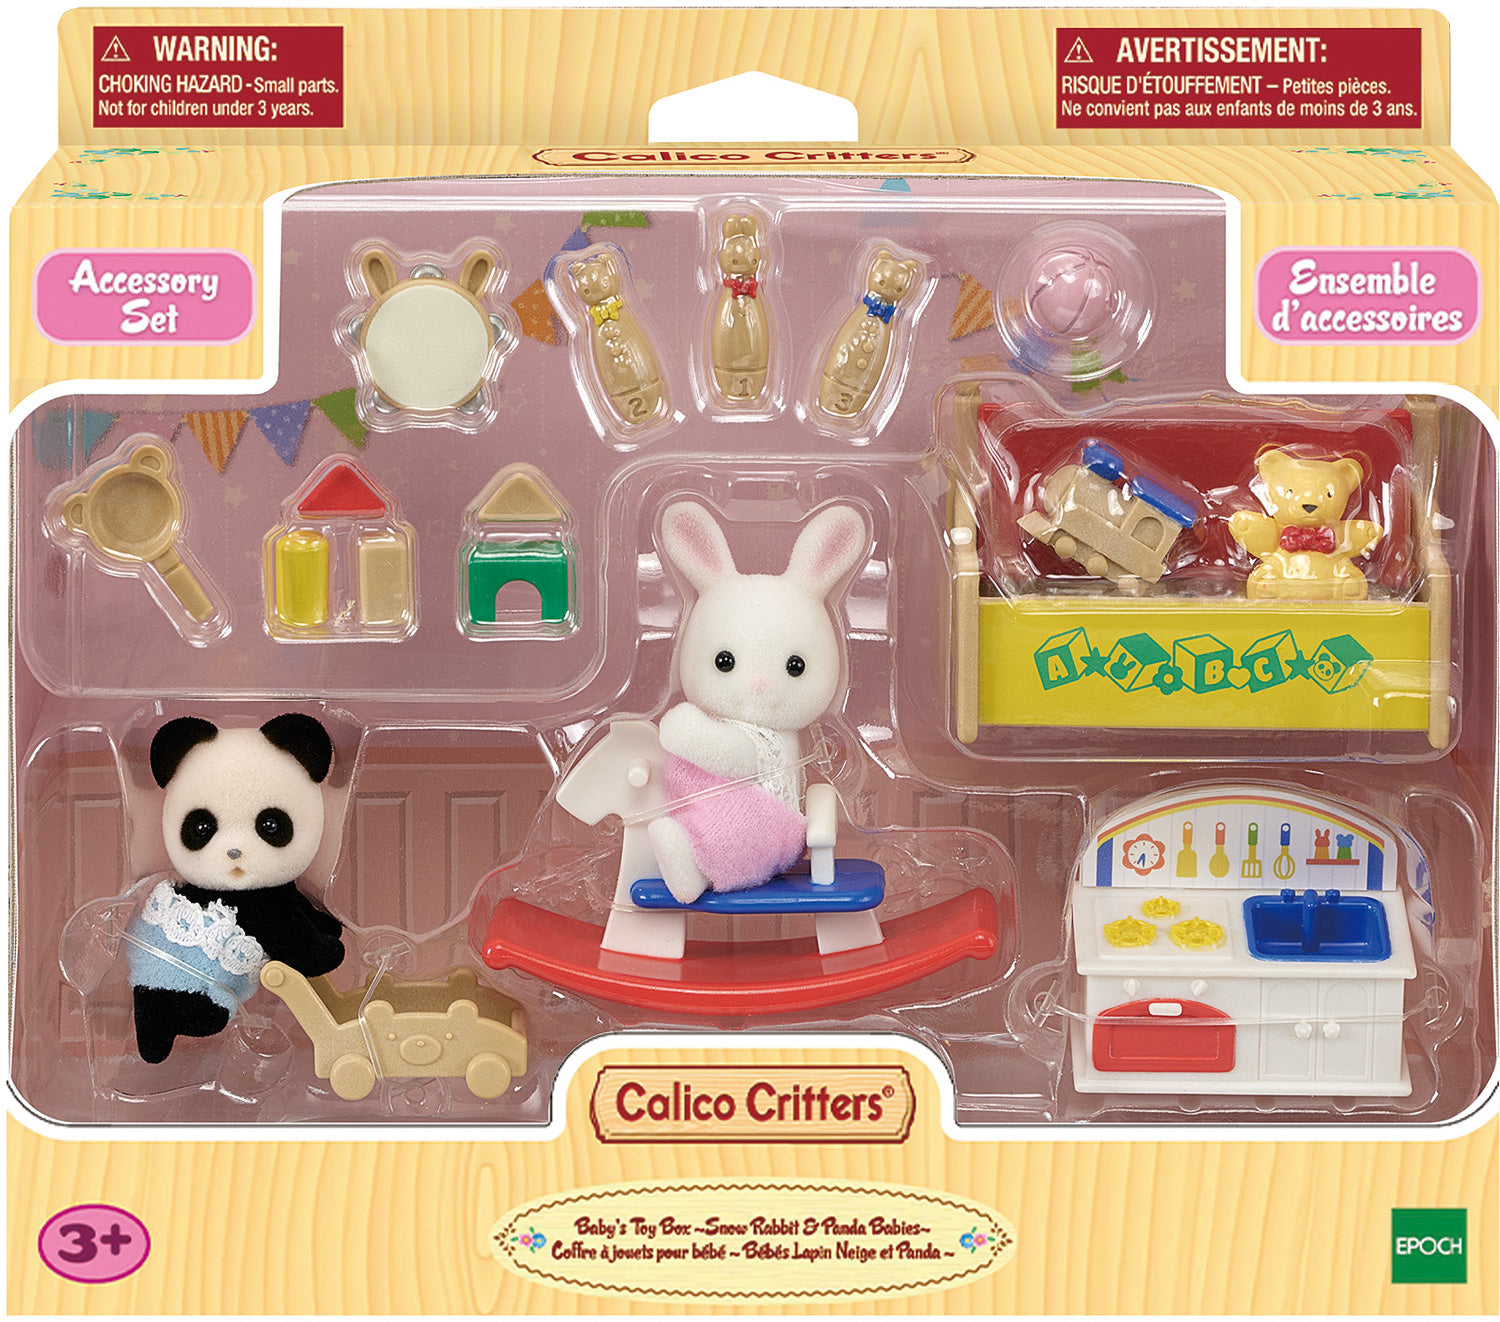 Sylvanian Families and Calico Critters Fun Dresses and Accessories Japanese  Craft Book 